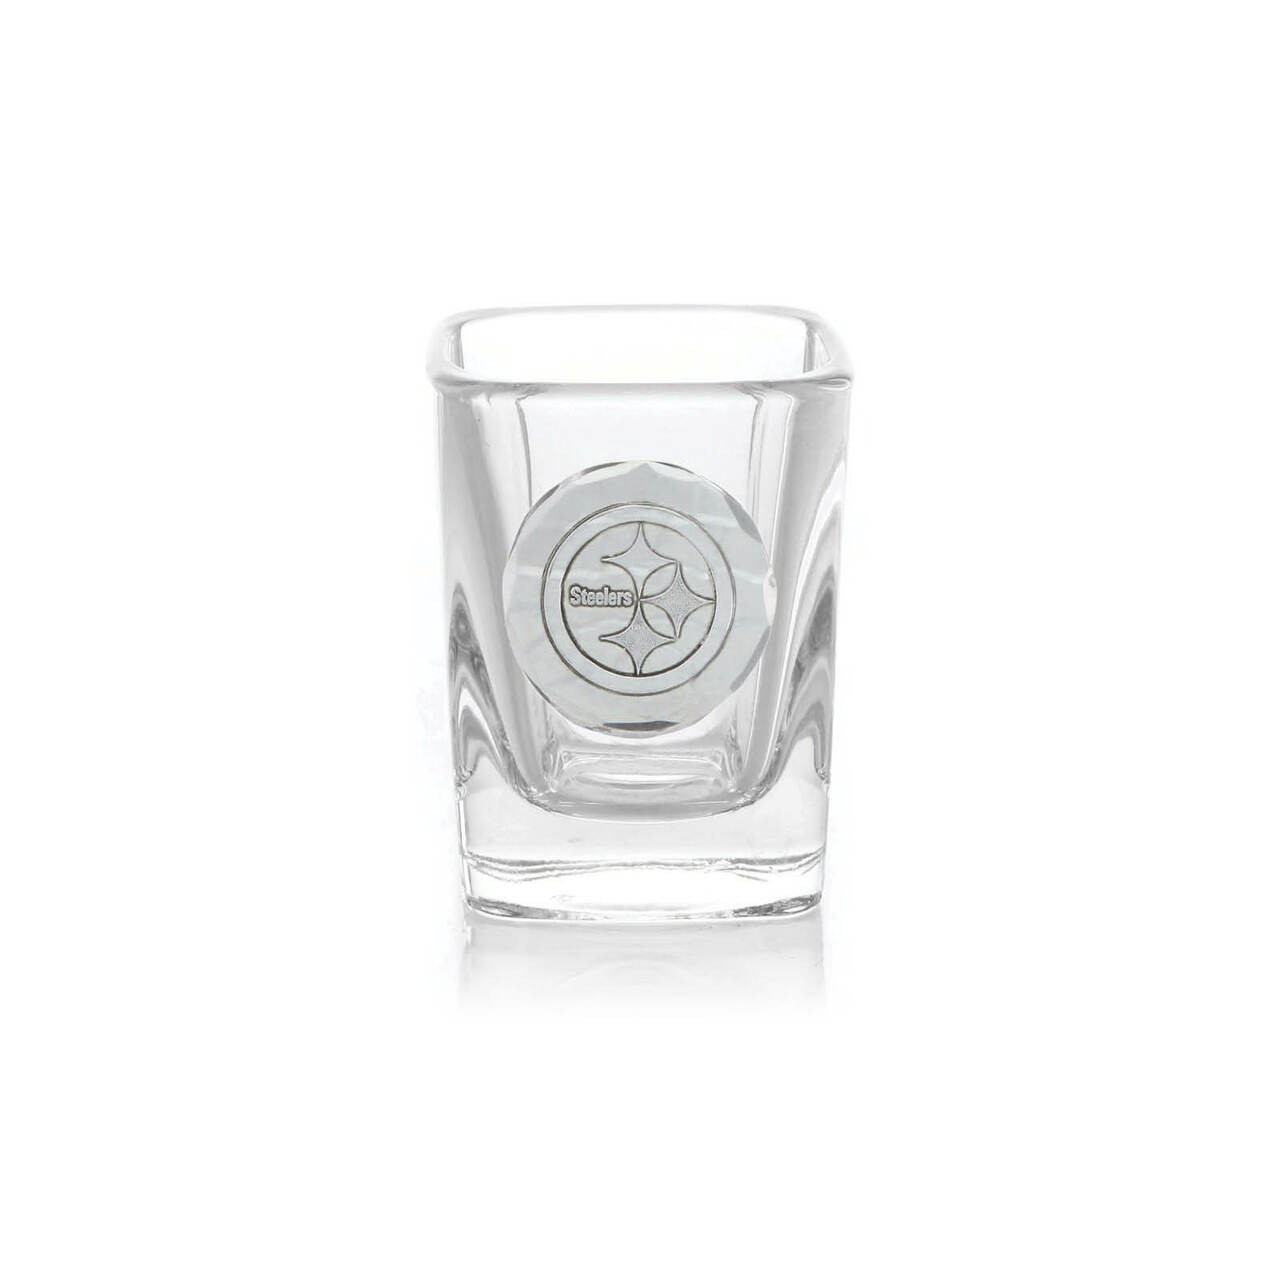 Las Vegas Raiders 2-Piece Shot Glass Set and Box (Aluminum) - Wendell  August Forge